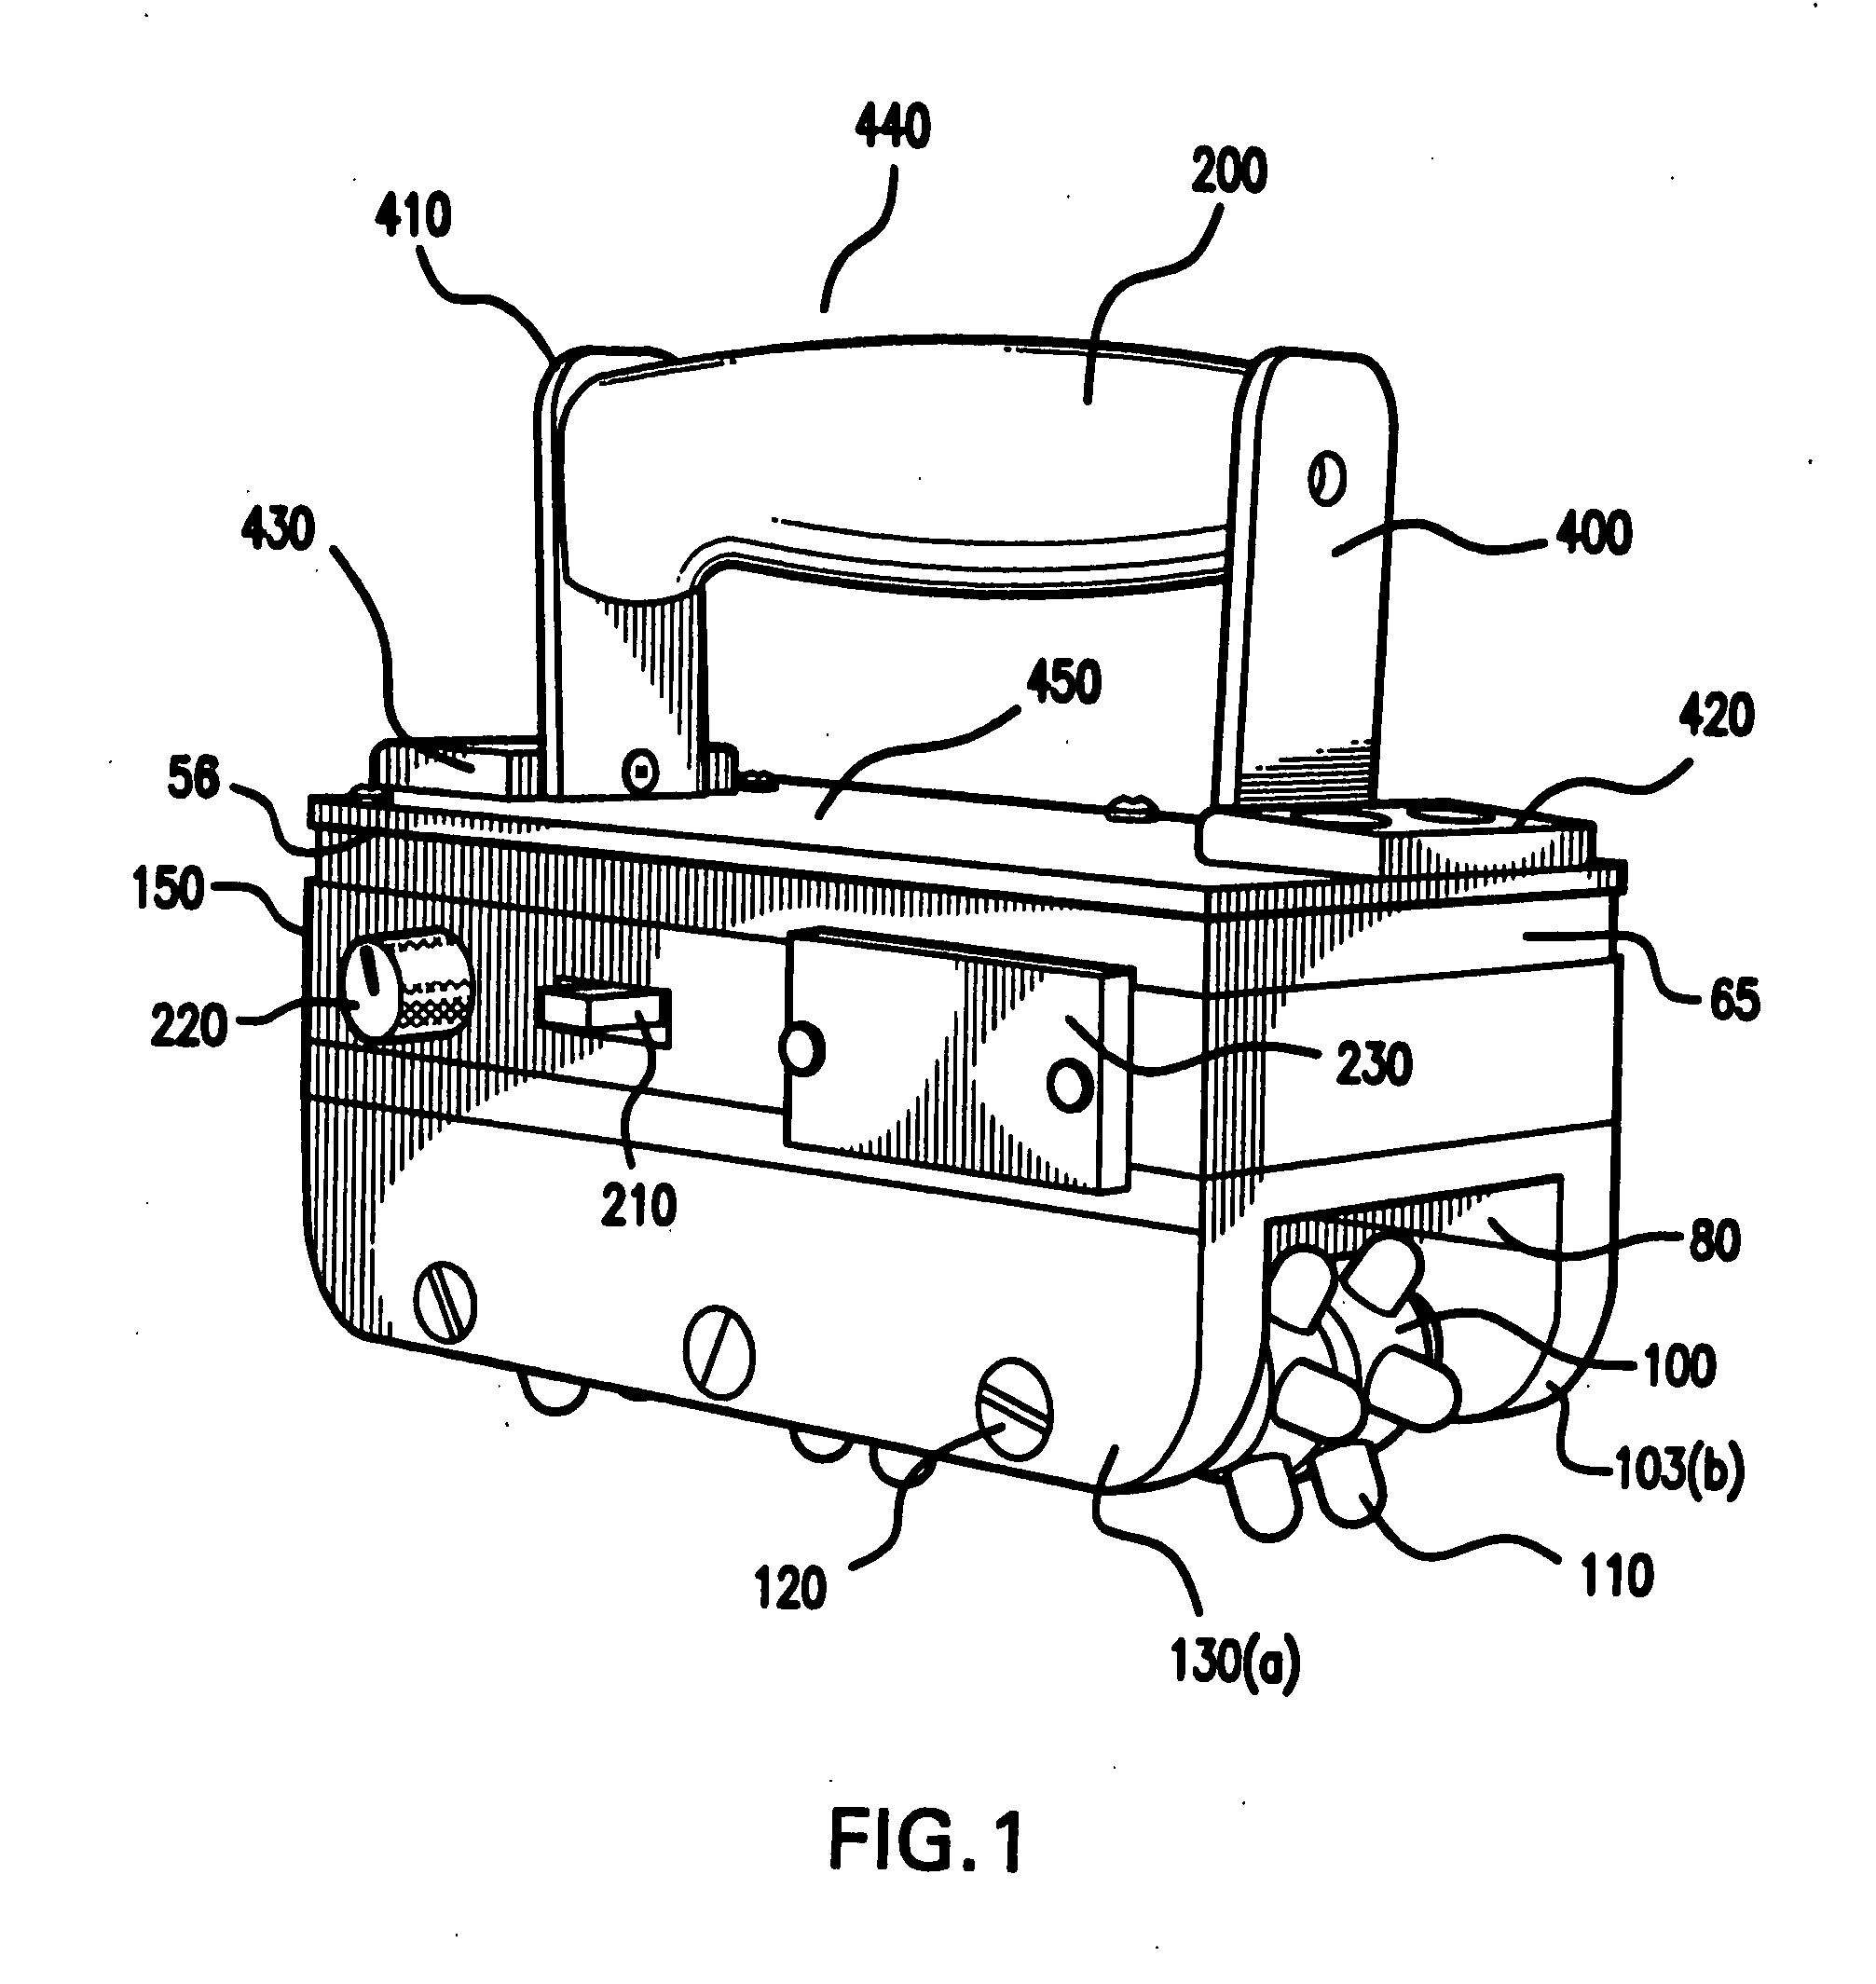 Apparatus for skin and muscle treatment